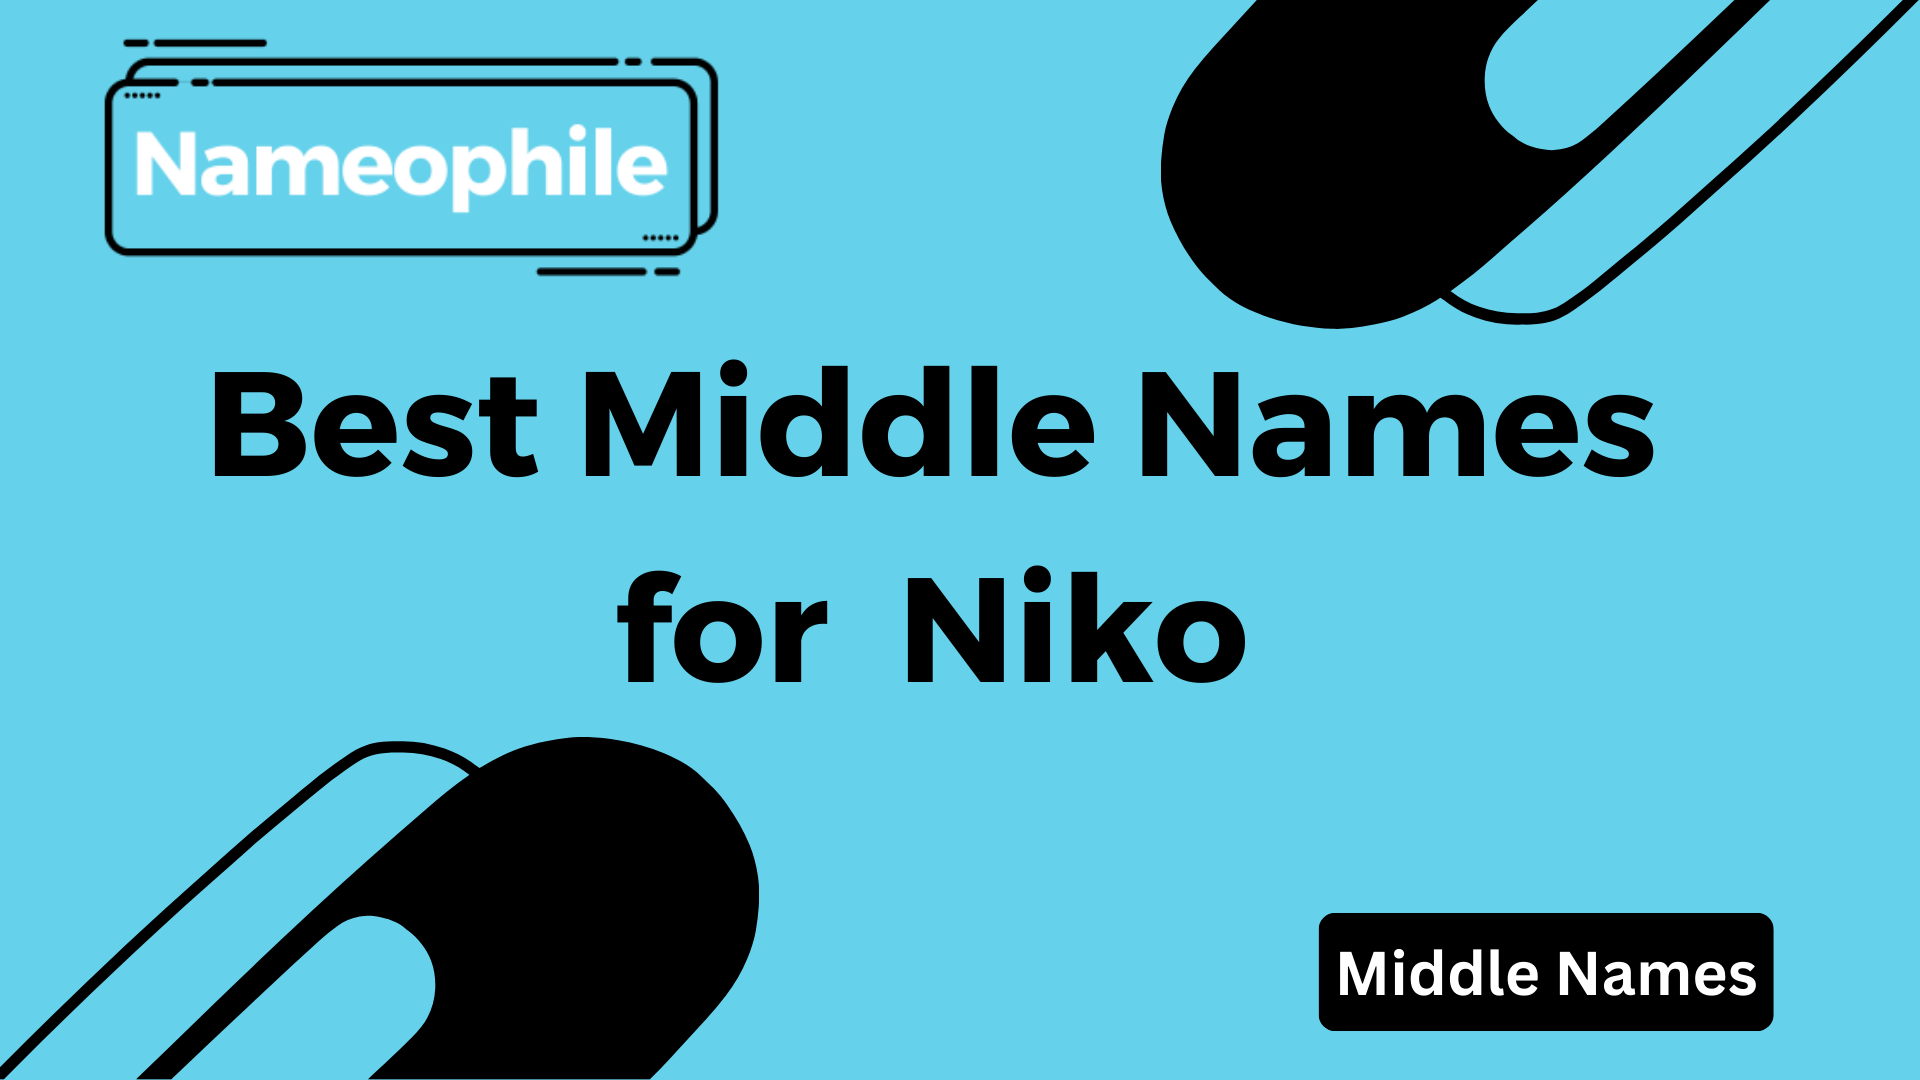 Best Middle Names for Niko